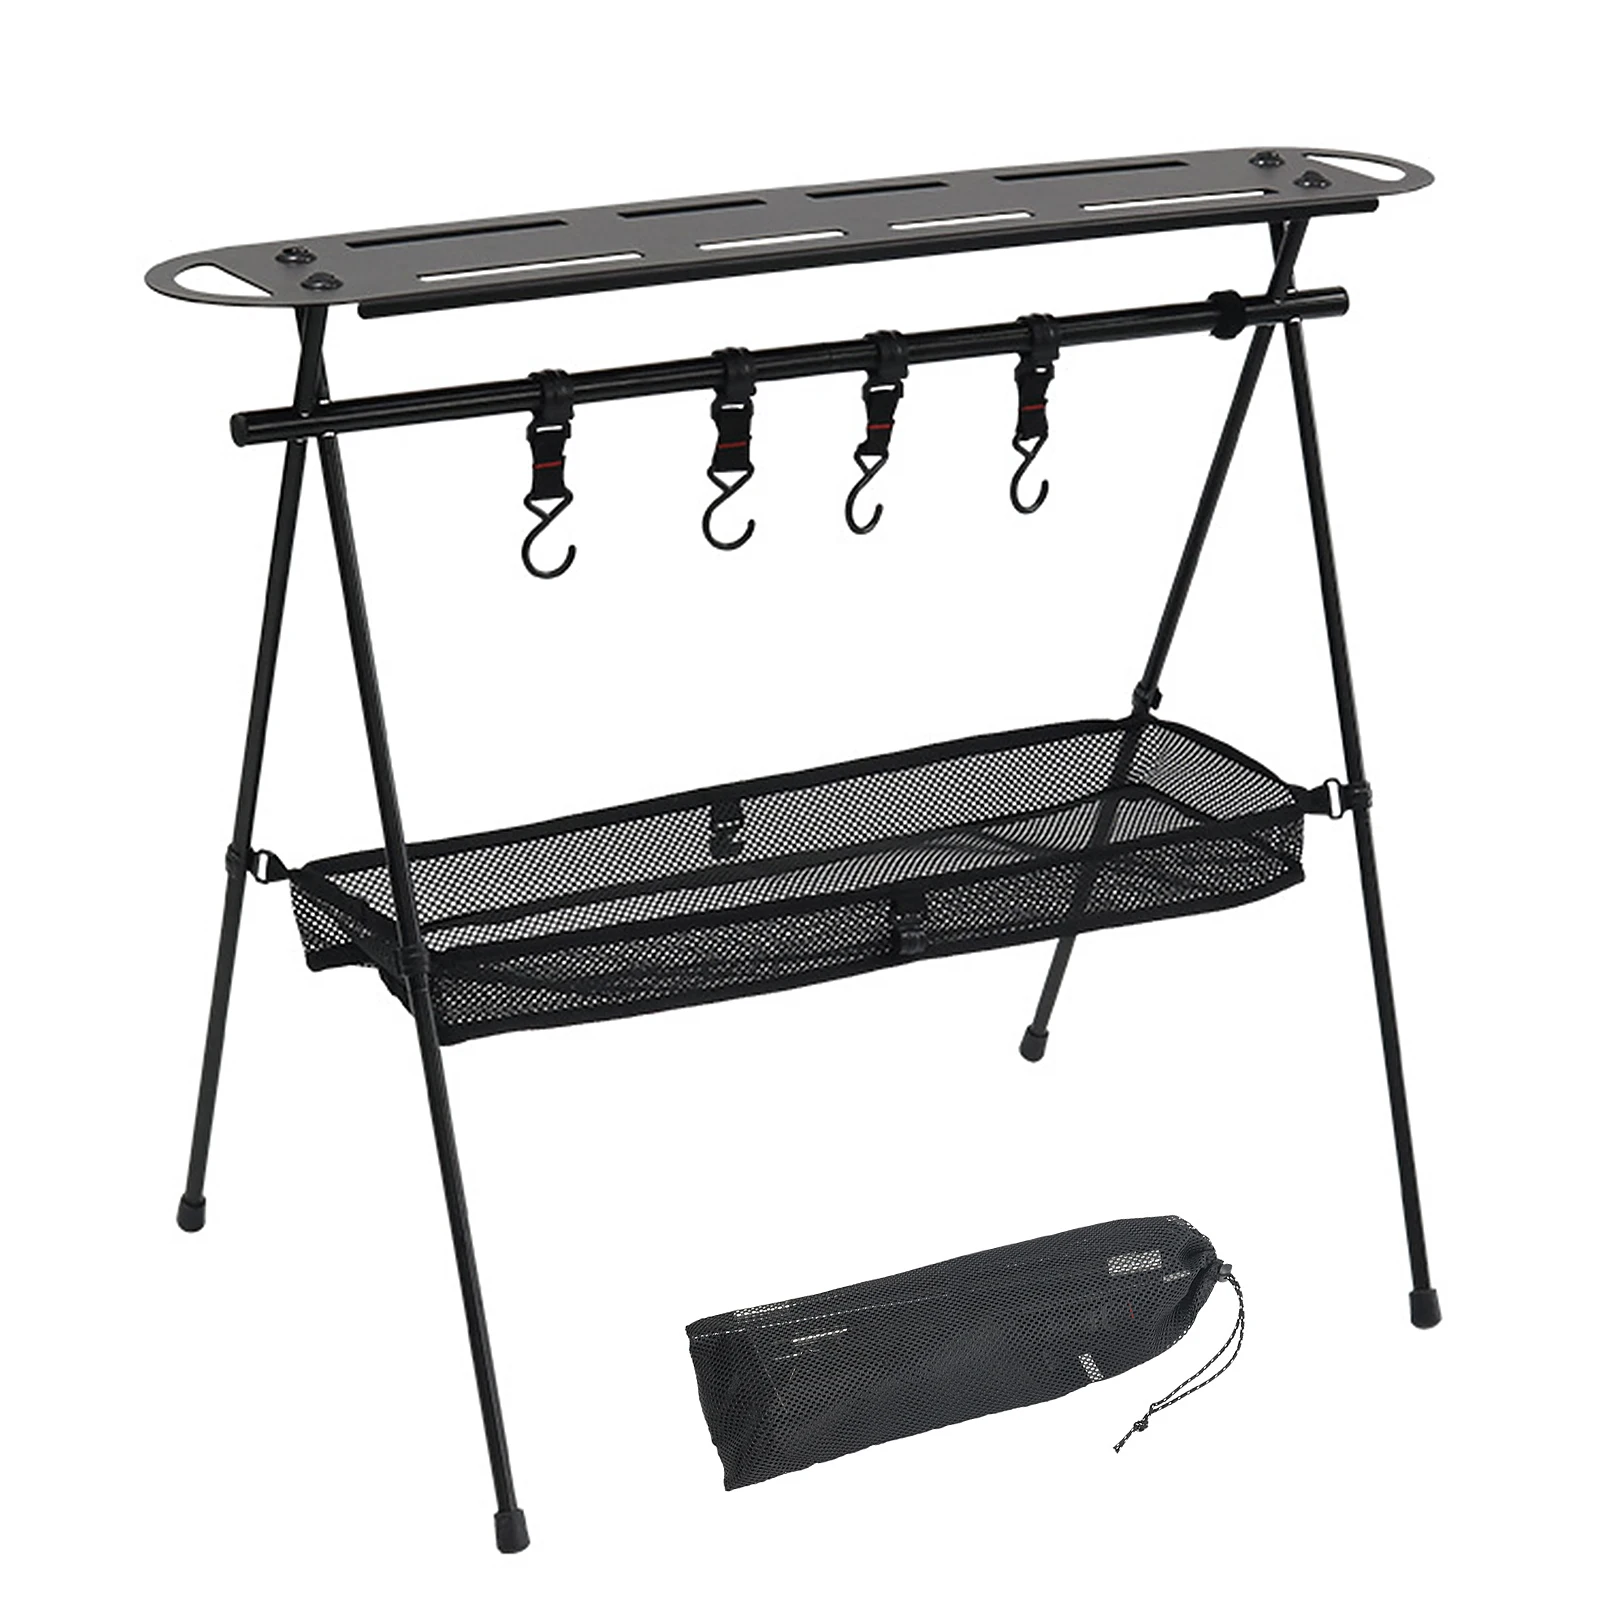 Collapsible Hanging Rack Shelf Portable Camping Picnic Cookware Hanger Stand Rack Storage Organizer with Top Plate Hooks